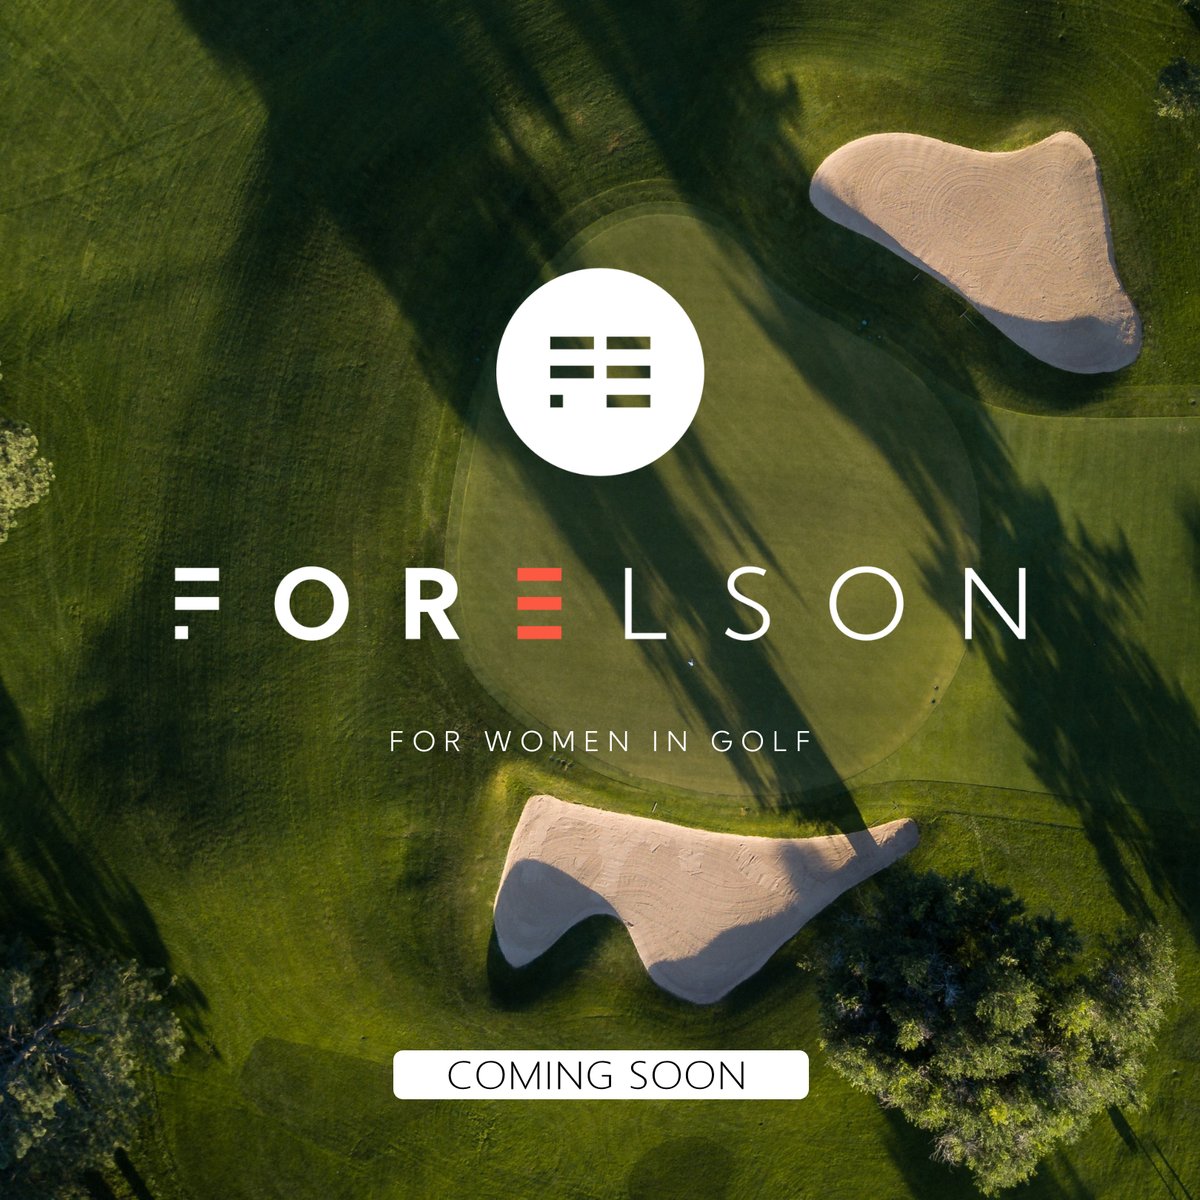 Forelson Ladies Golf Clothing - Coming Soon! - Keep an eye on our social channels for more details. #forelson #ladiesgolf #golf #clothing